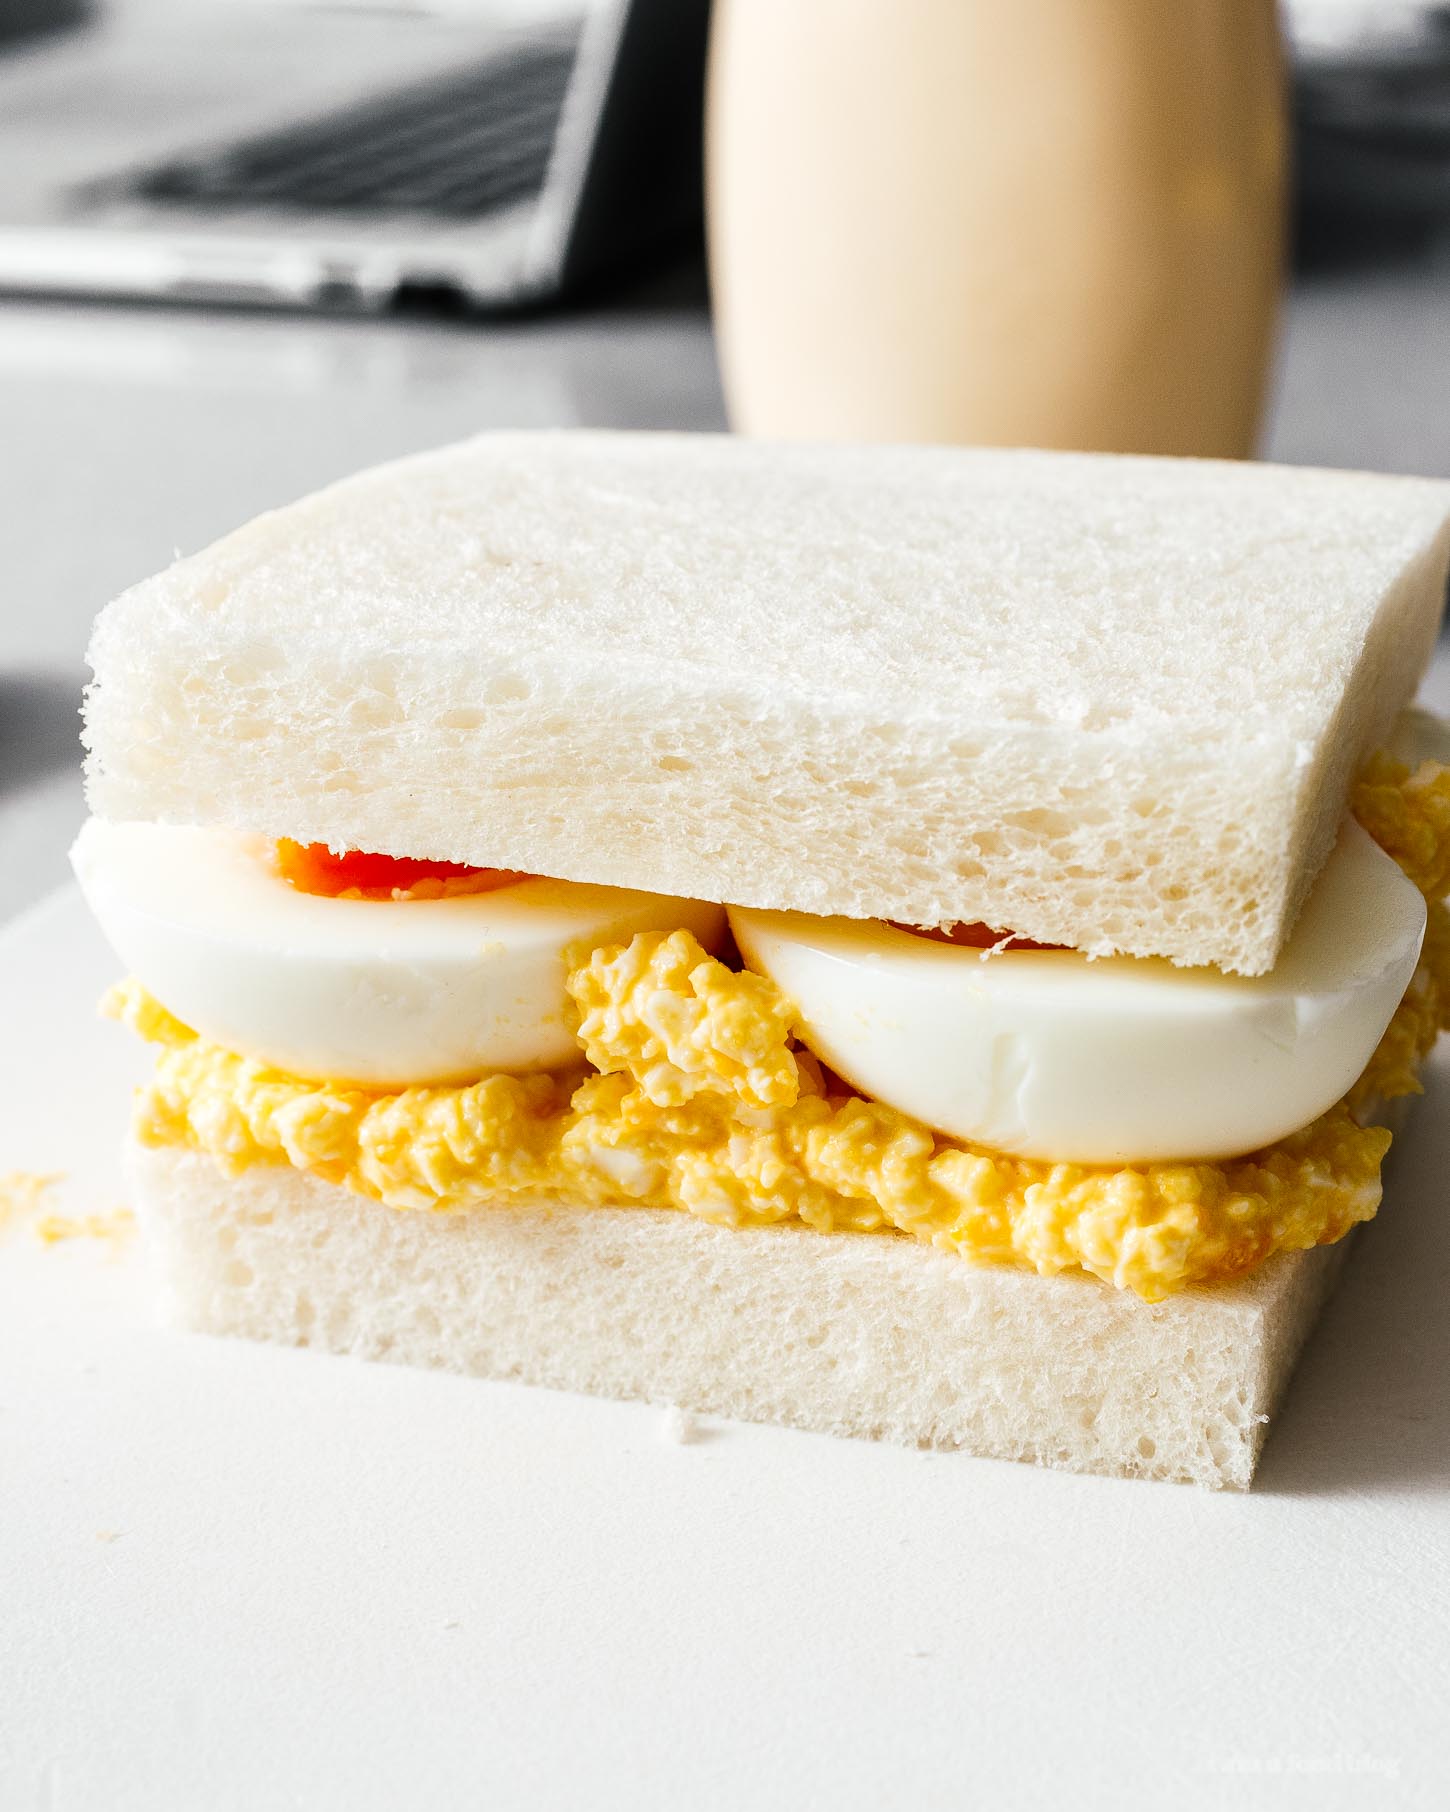 Japanese-style egg salad sandwiches! Do you love egg salad sandwiches but want a twist? Creamy kewpie mayo and jammy eggs makes this sandwich a winner. Just like the sandwiches you had on vacation in Japan but better ;) #sandwiches #eggsalad #japanese #japanesefood #recipes #recipeoftheday #eggs